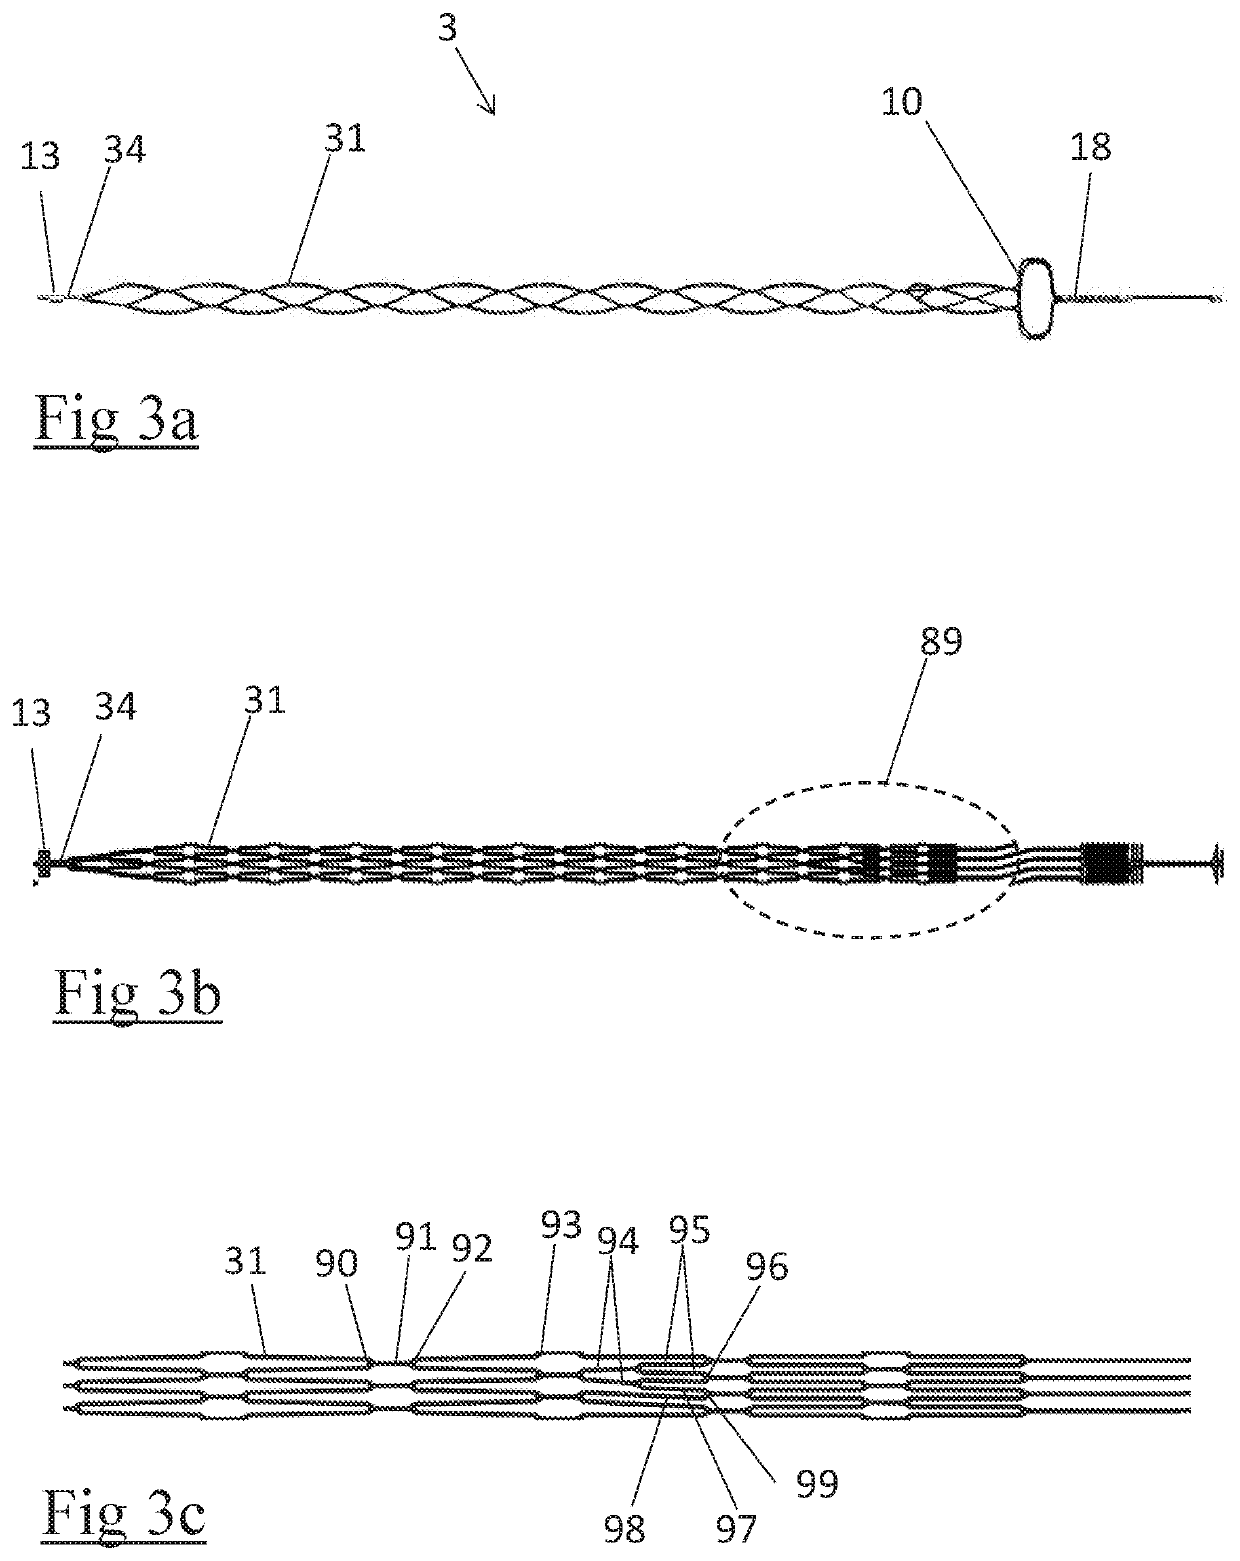 Clot retrieval device for removing occlusive clot from a blood vessel